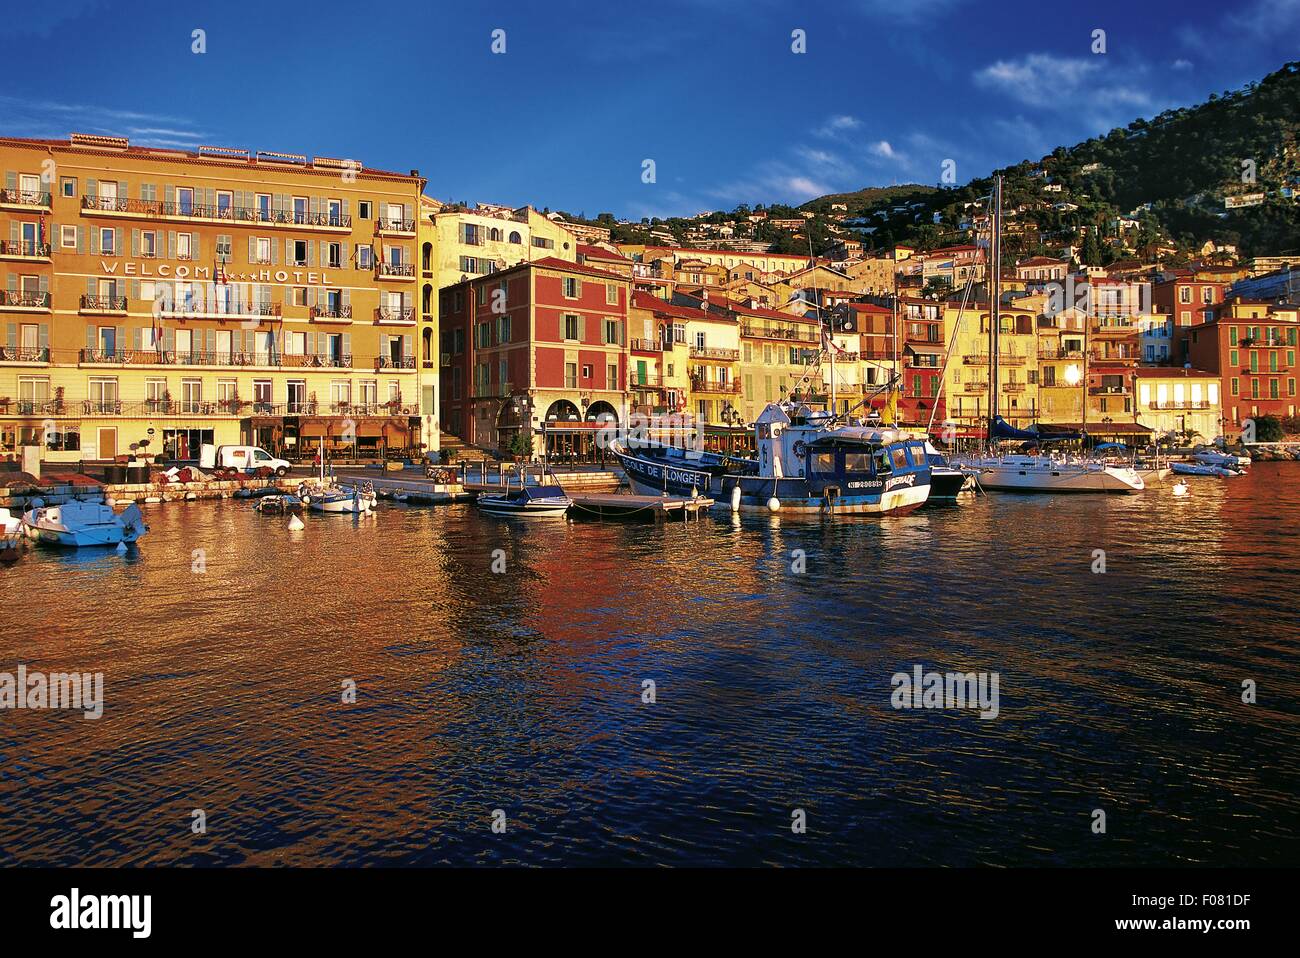 View of Welcome Hotel at port of Villefranche-sur-Mer, France Stock Photo